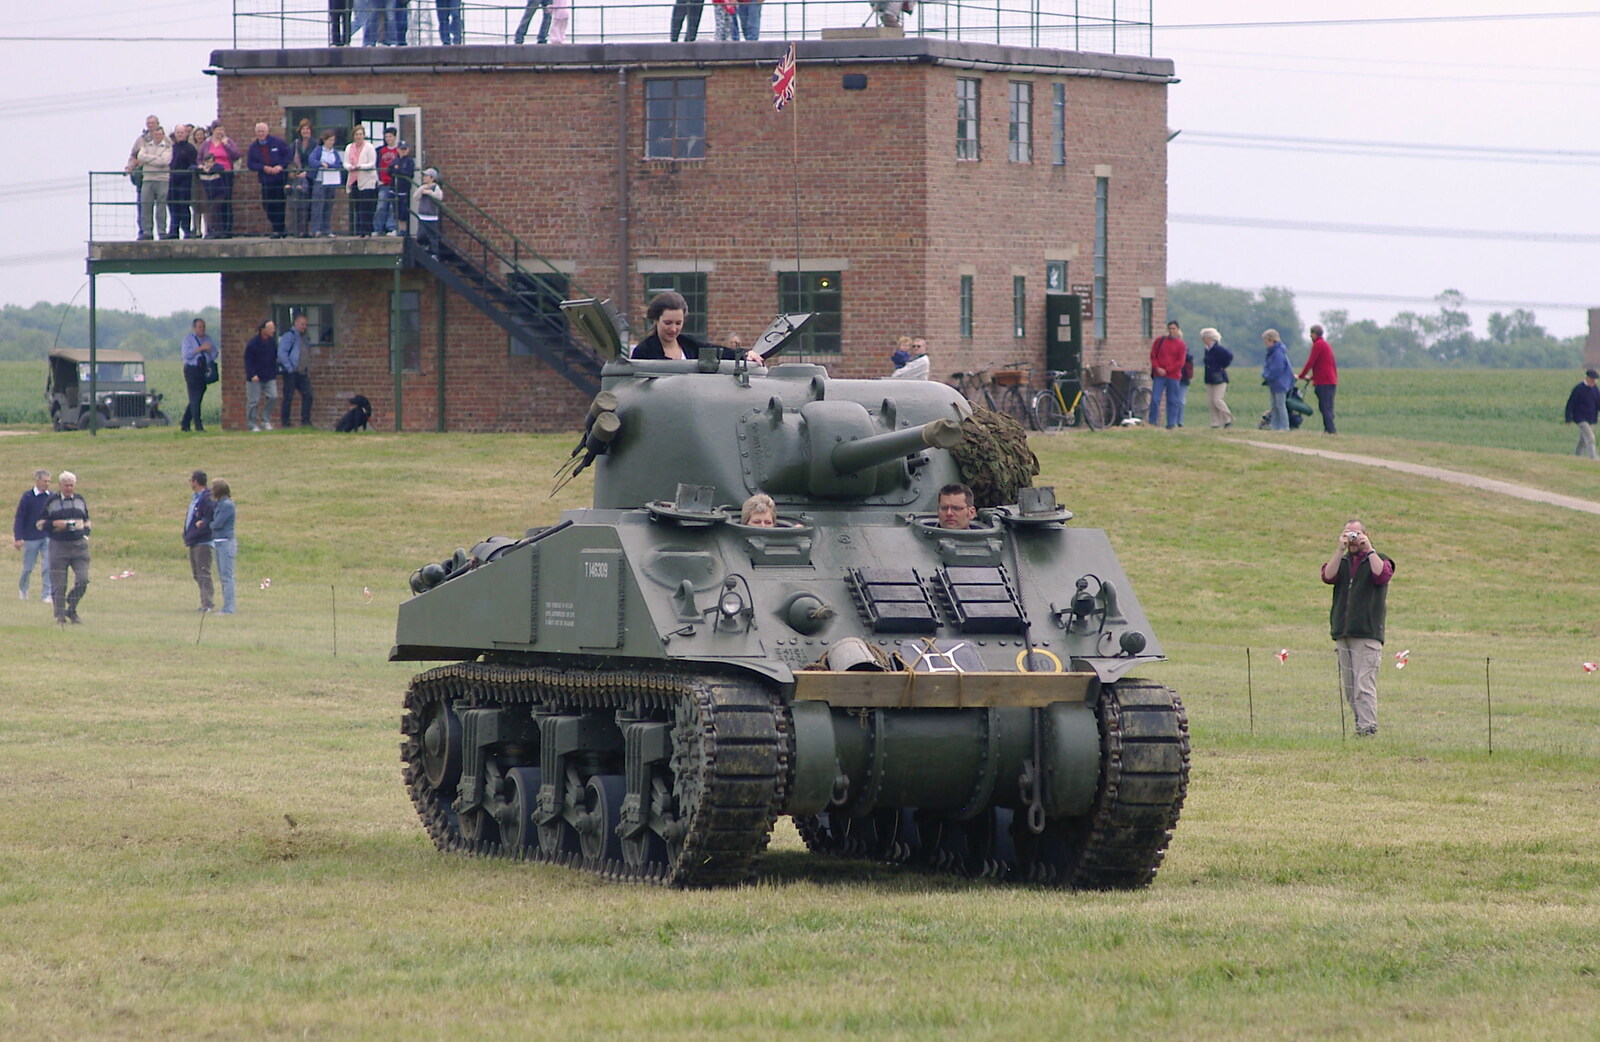 The Sherman tank rumbles past the control tower from An Airfield Open Day, Debach, Suffolk - 12th June 2005